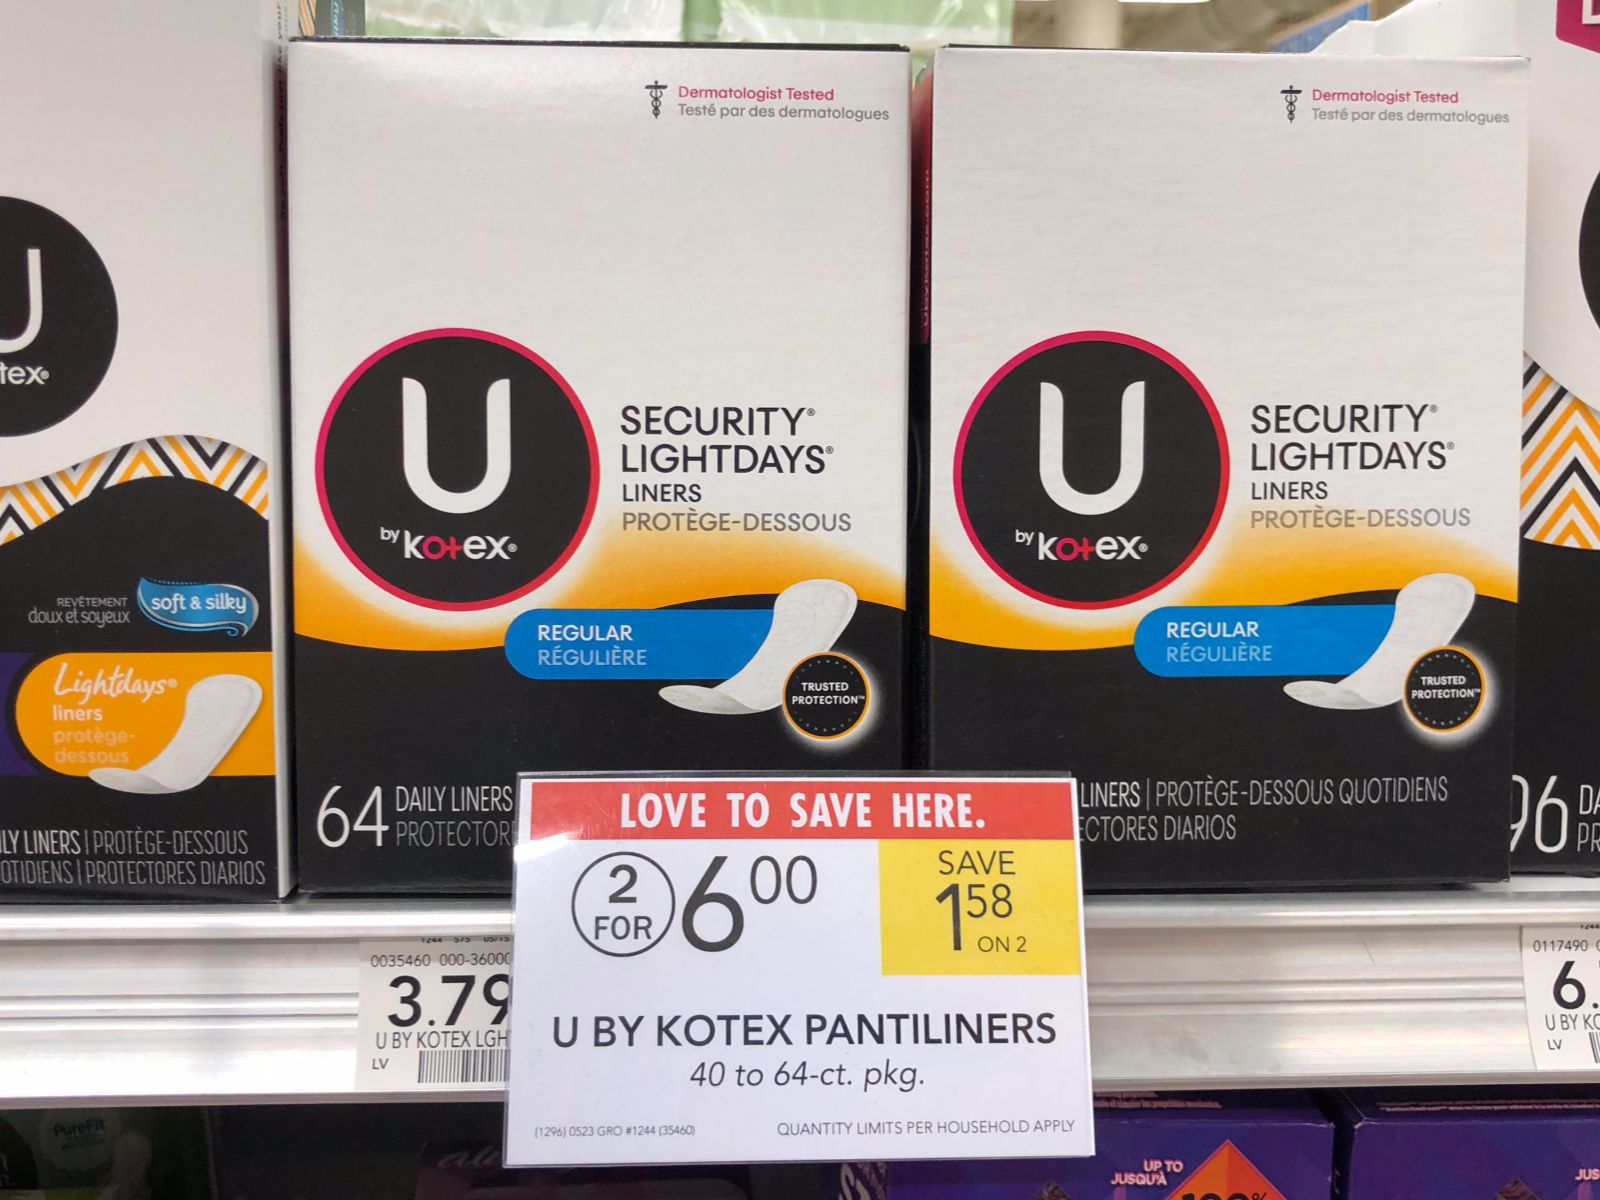 Get Big Savings On U by Kotex Tampons, Pads & Liners Right Now At Publix on I Heart Publix